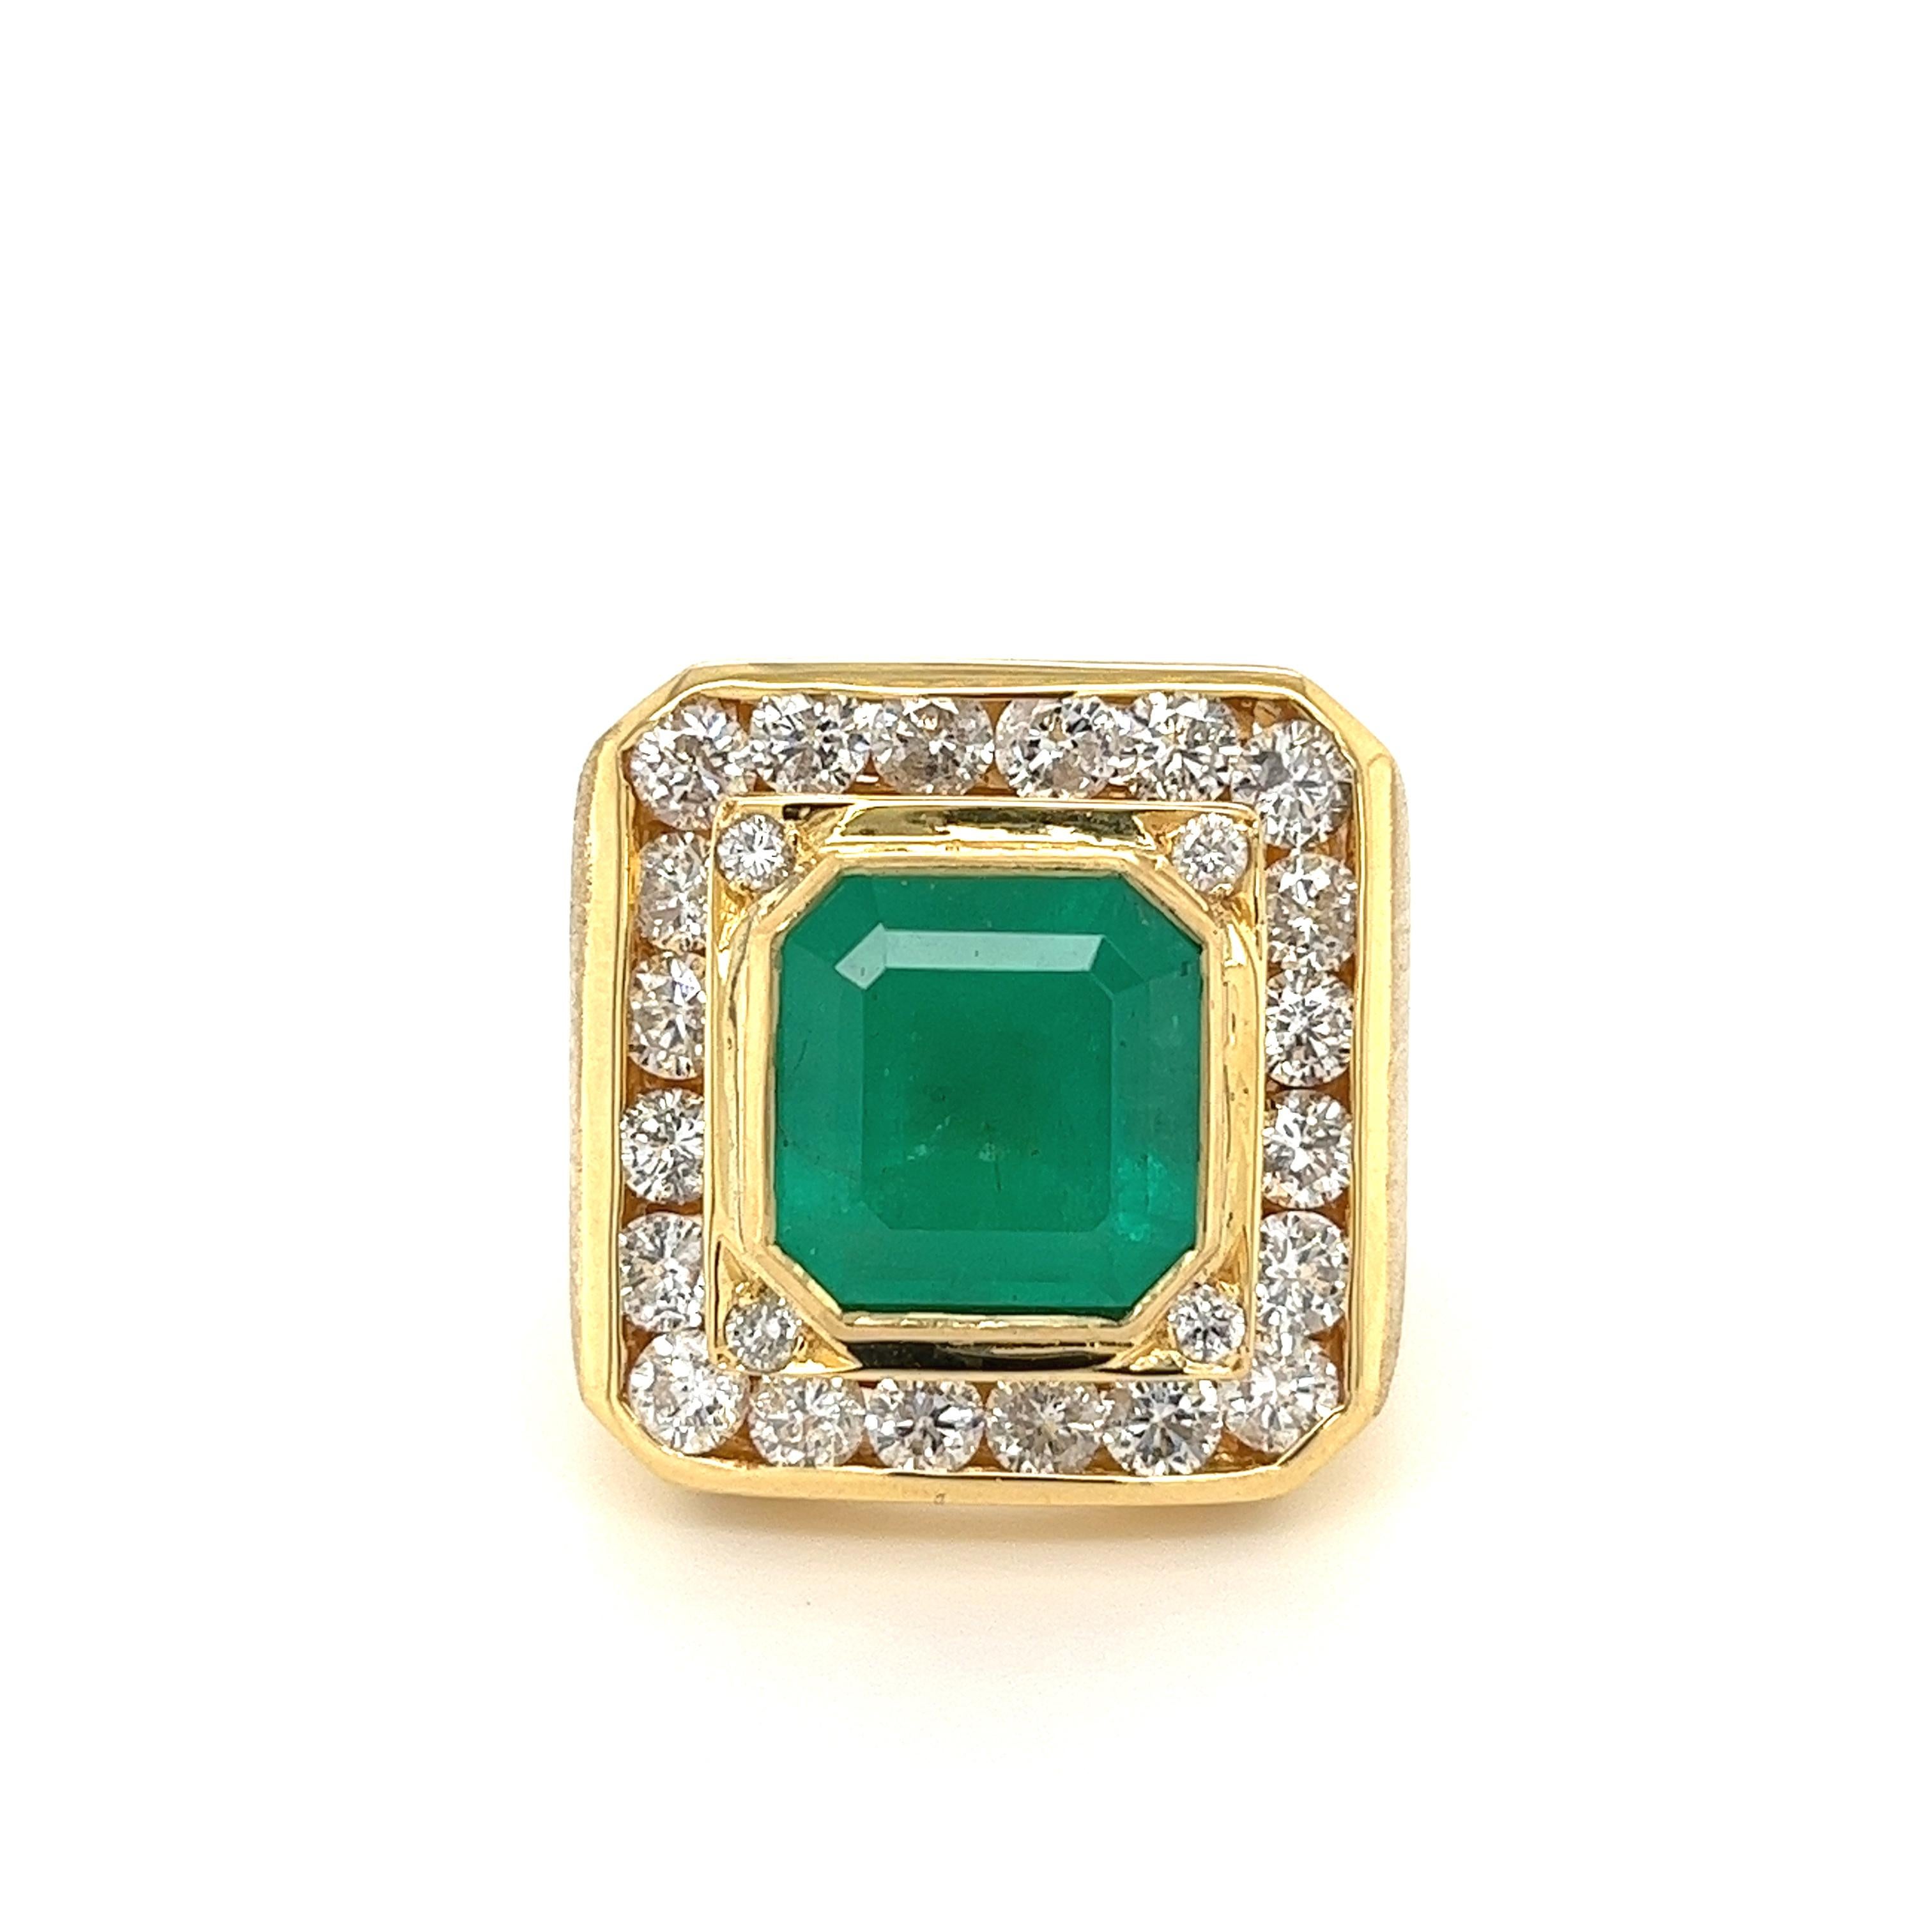 Top-quality vintage natural Emerald men's ring. This vibrant Colombian Emerald bears excellent luster and brilliance. Bezel set, with a gallery-back for breathability and comfort during wear. 

Emerald has Colombian origins, as it was mined over 20